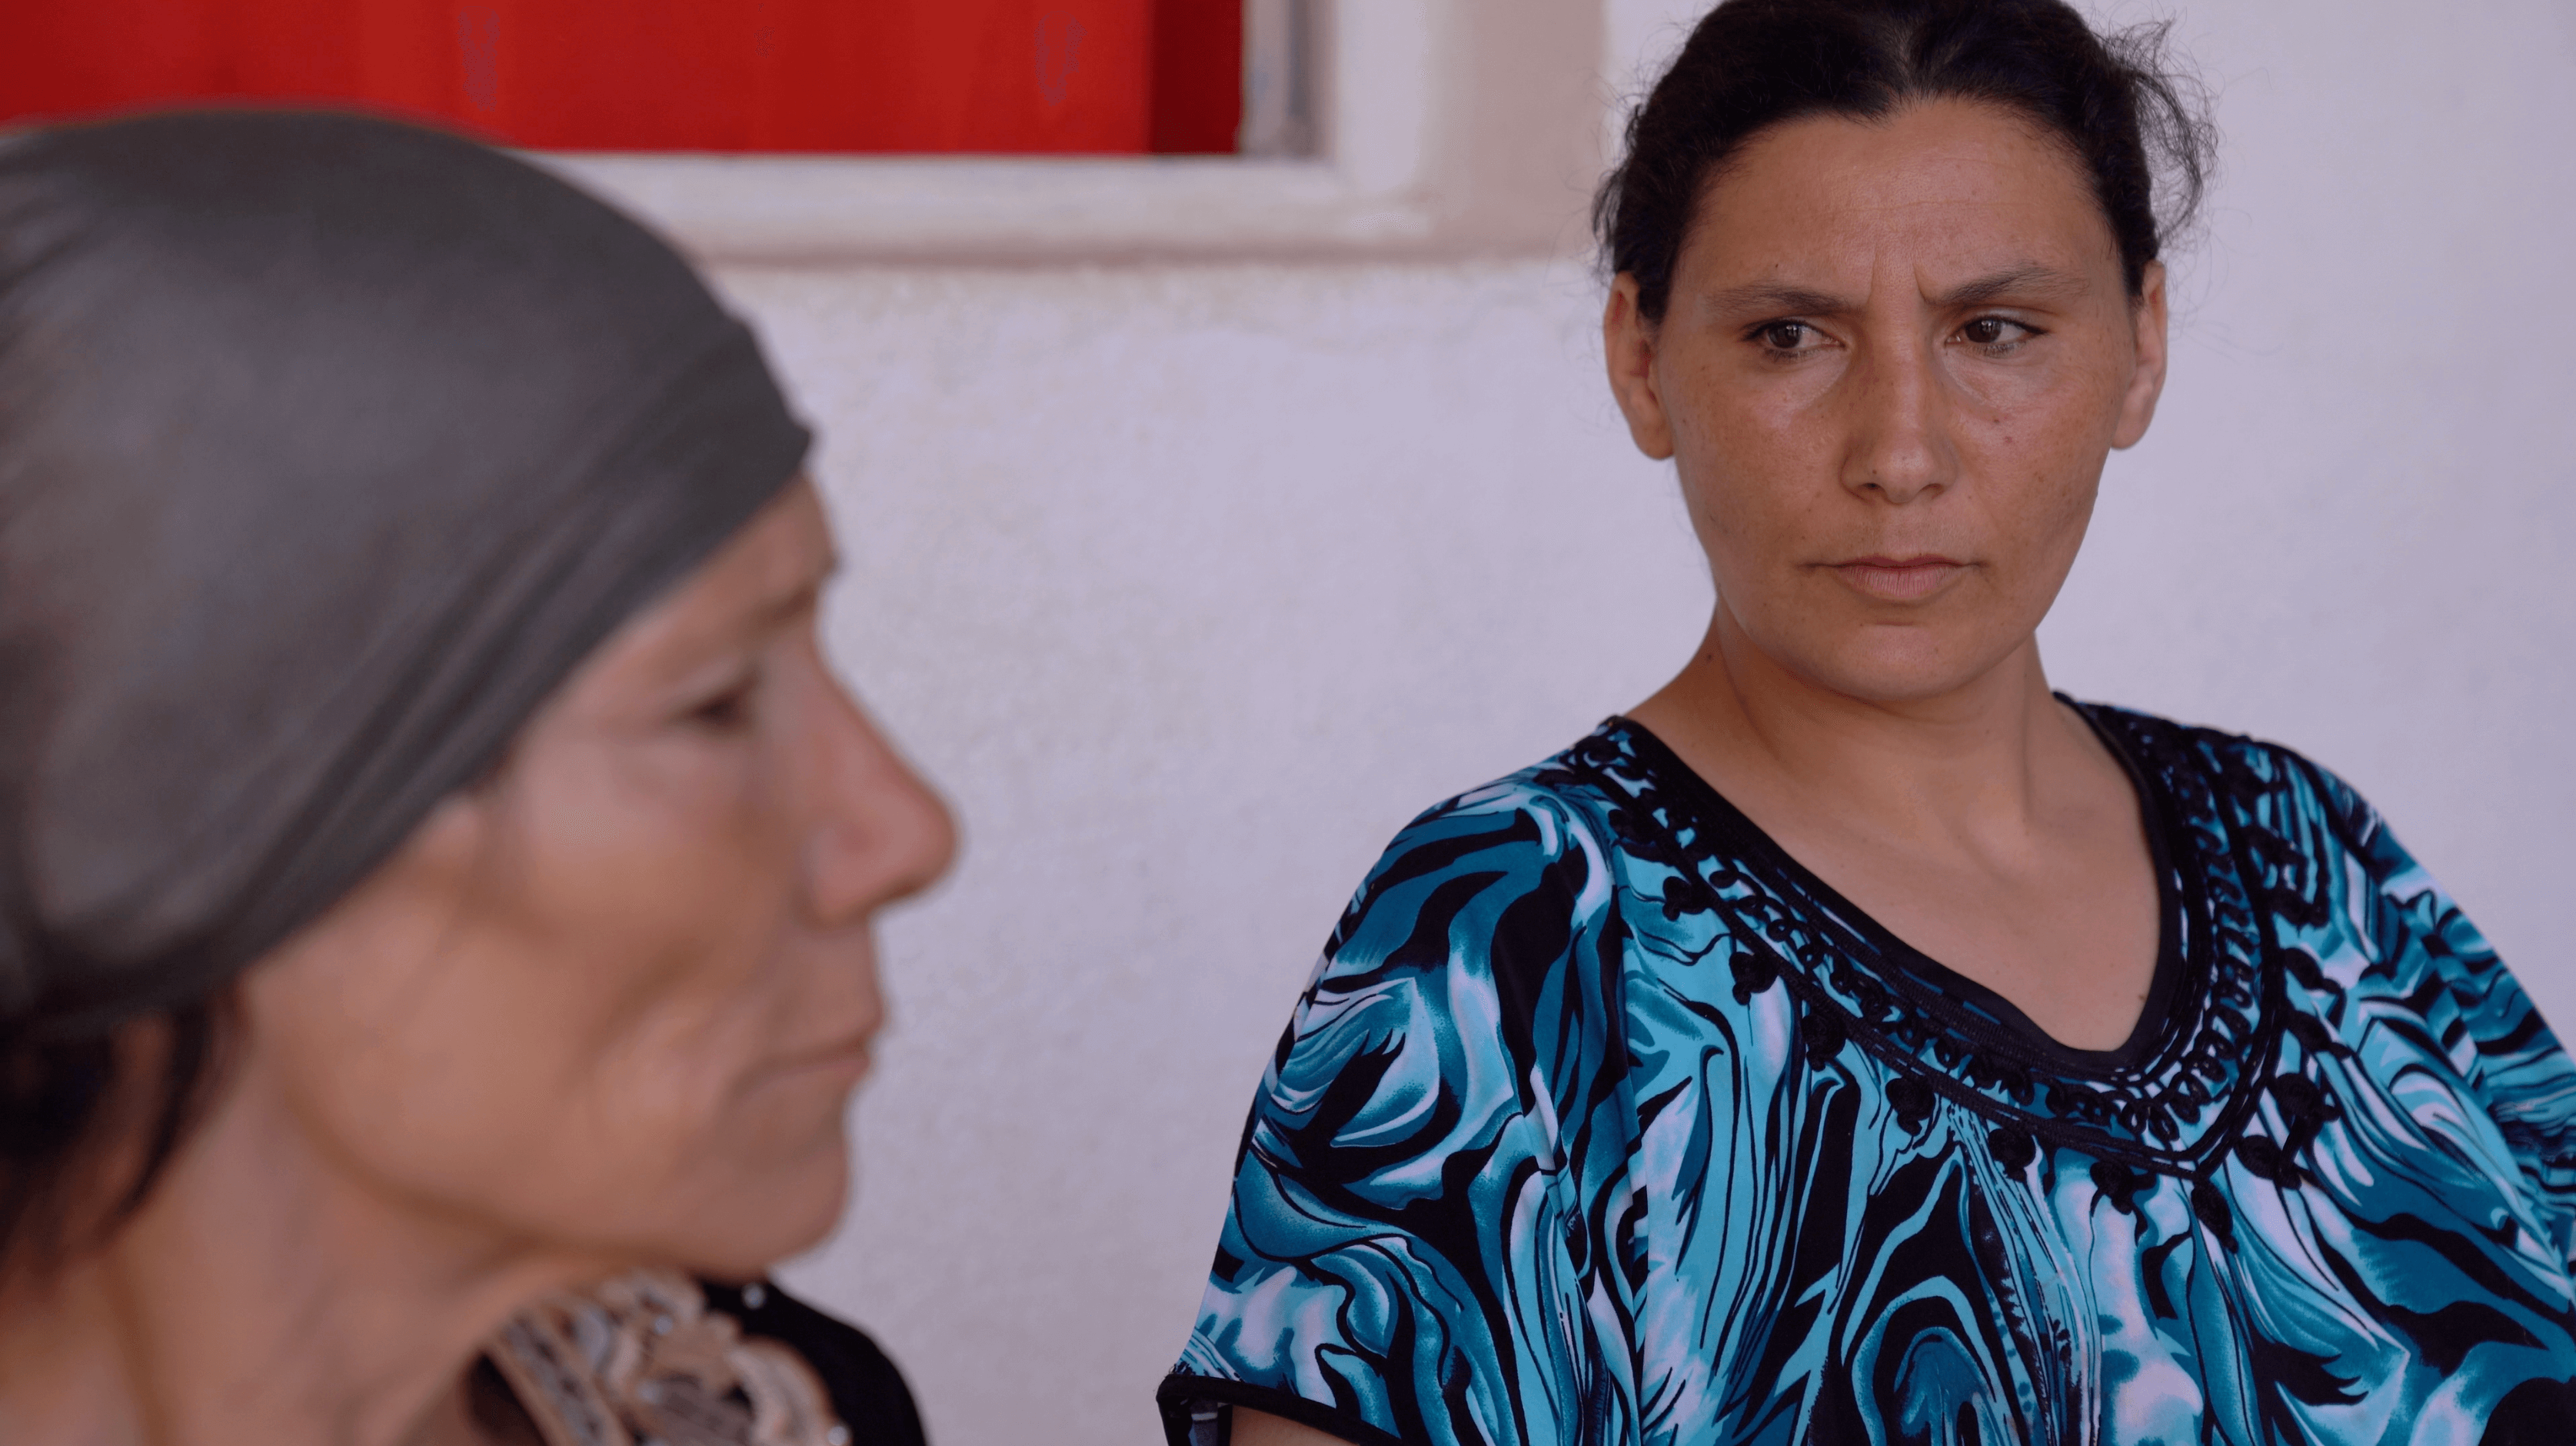 Still from Machtat. One woman looks to another woman in a headwrap who is closer to the camera and slightly out of focus.